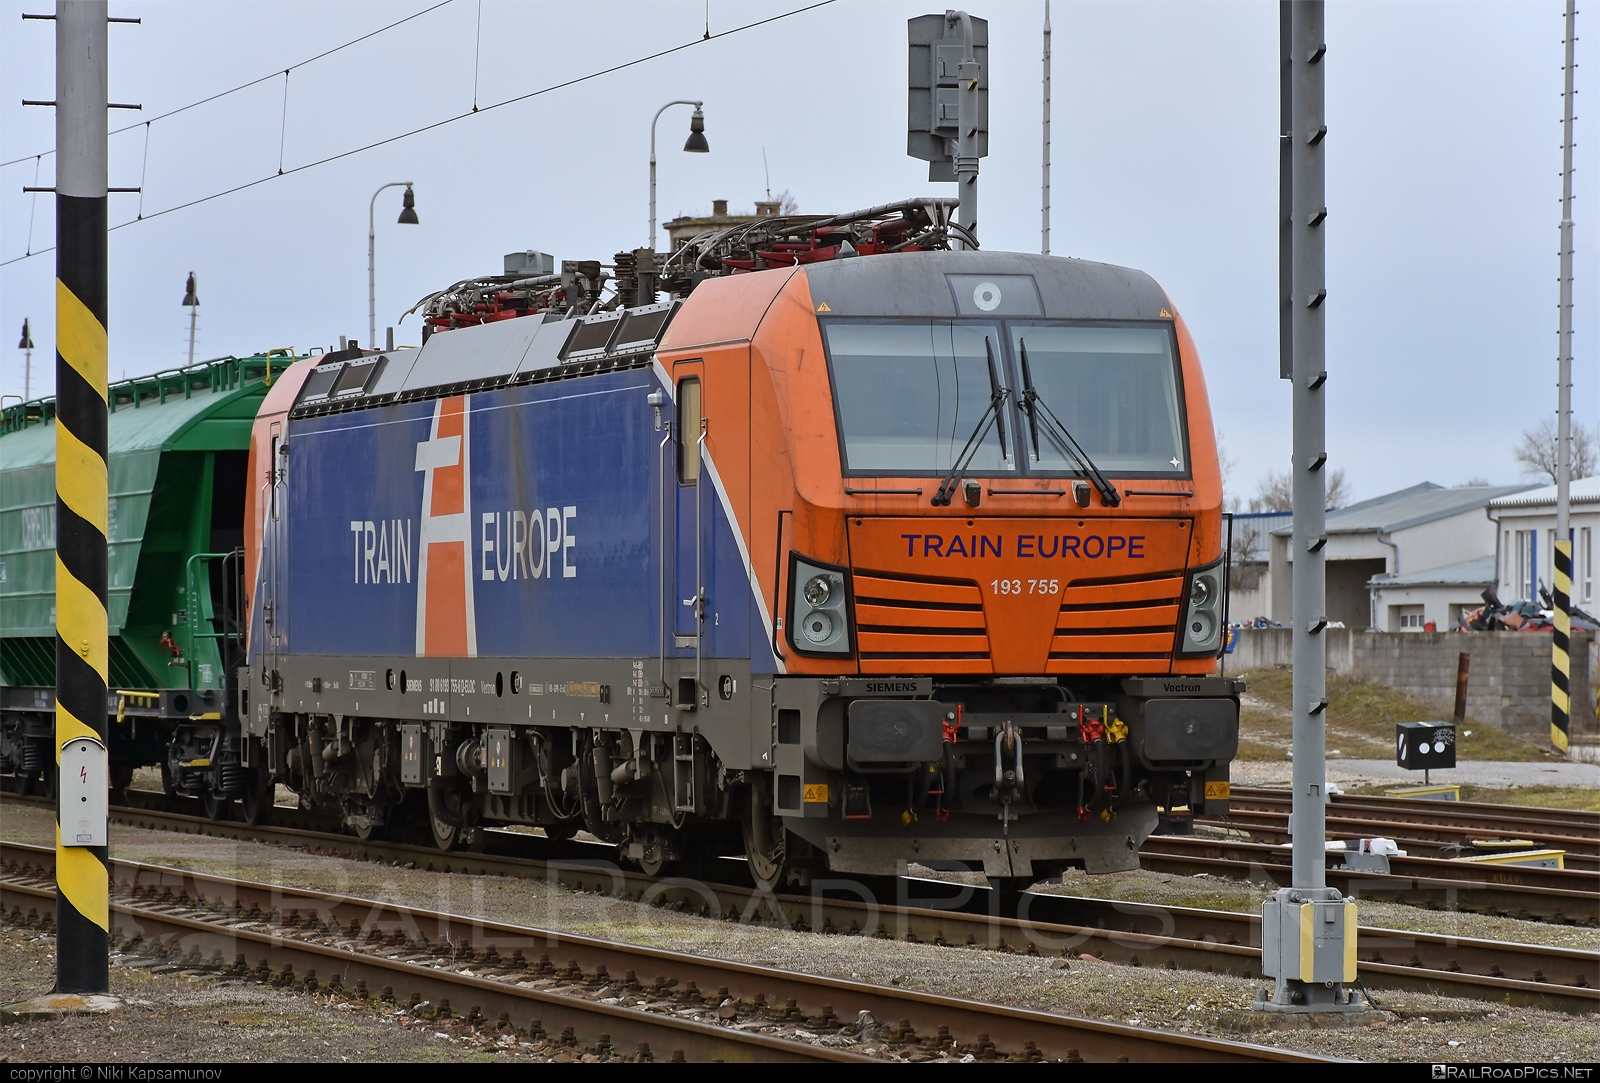 Siemens Vectron MS - 193 755 operated by LOKORAIL, a.s. #ell #ellgermany #eloc #europeanlocomotiveleasing #lokorail #lrl #siemens #siemensvectron #siemensvectronms #traineurope #vectron #vectronms